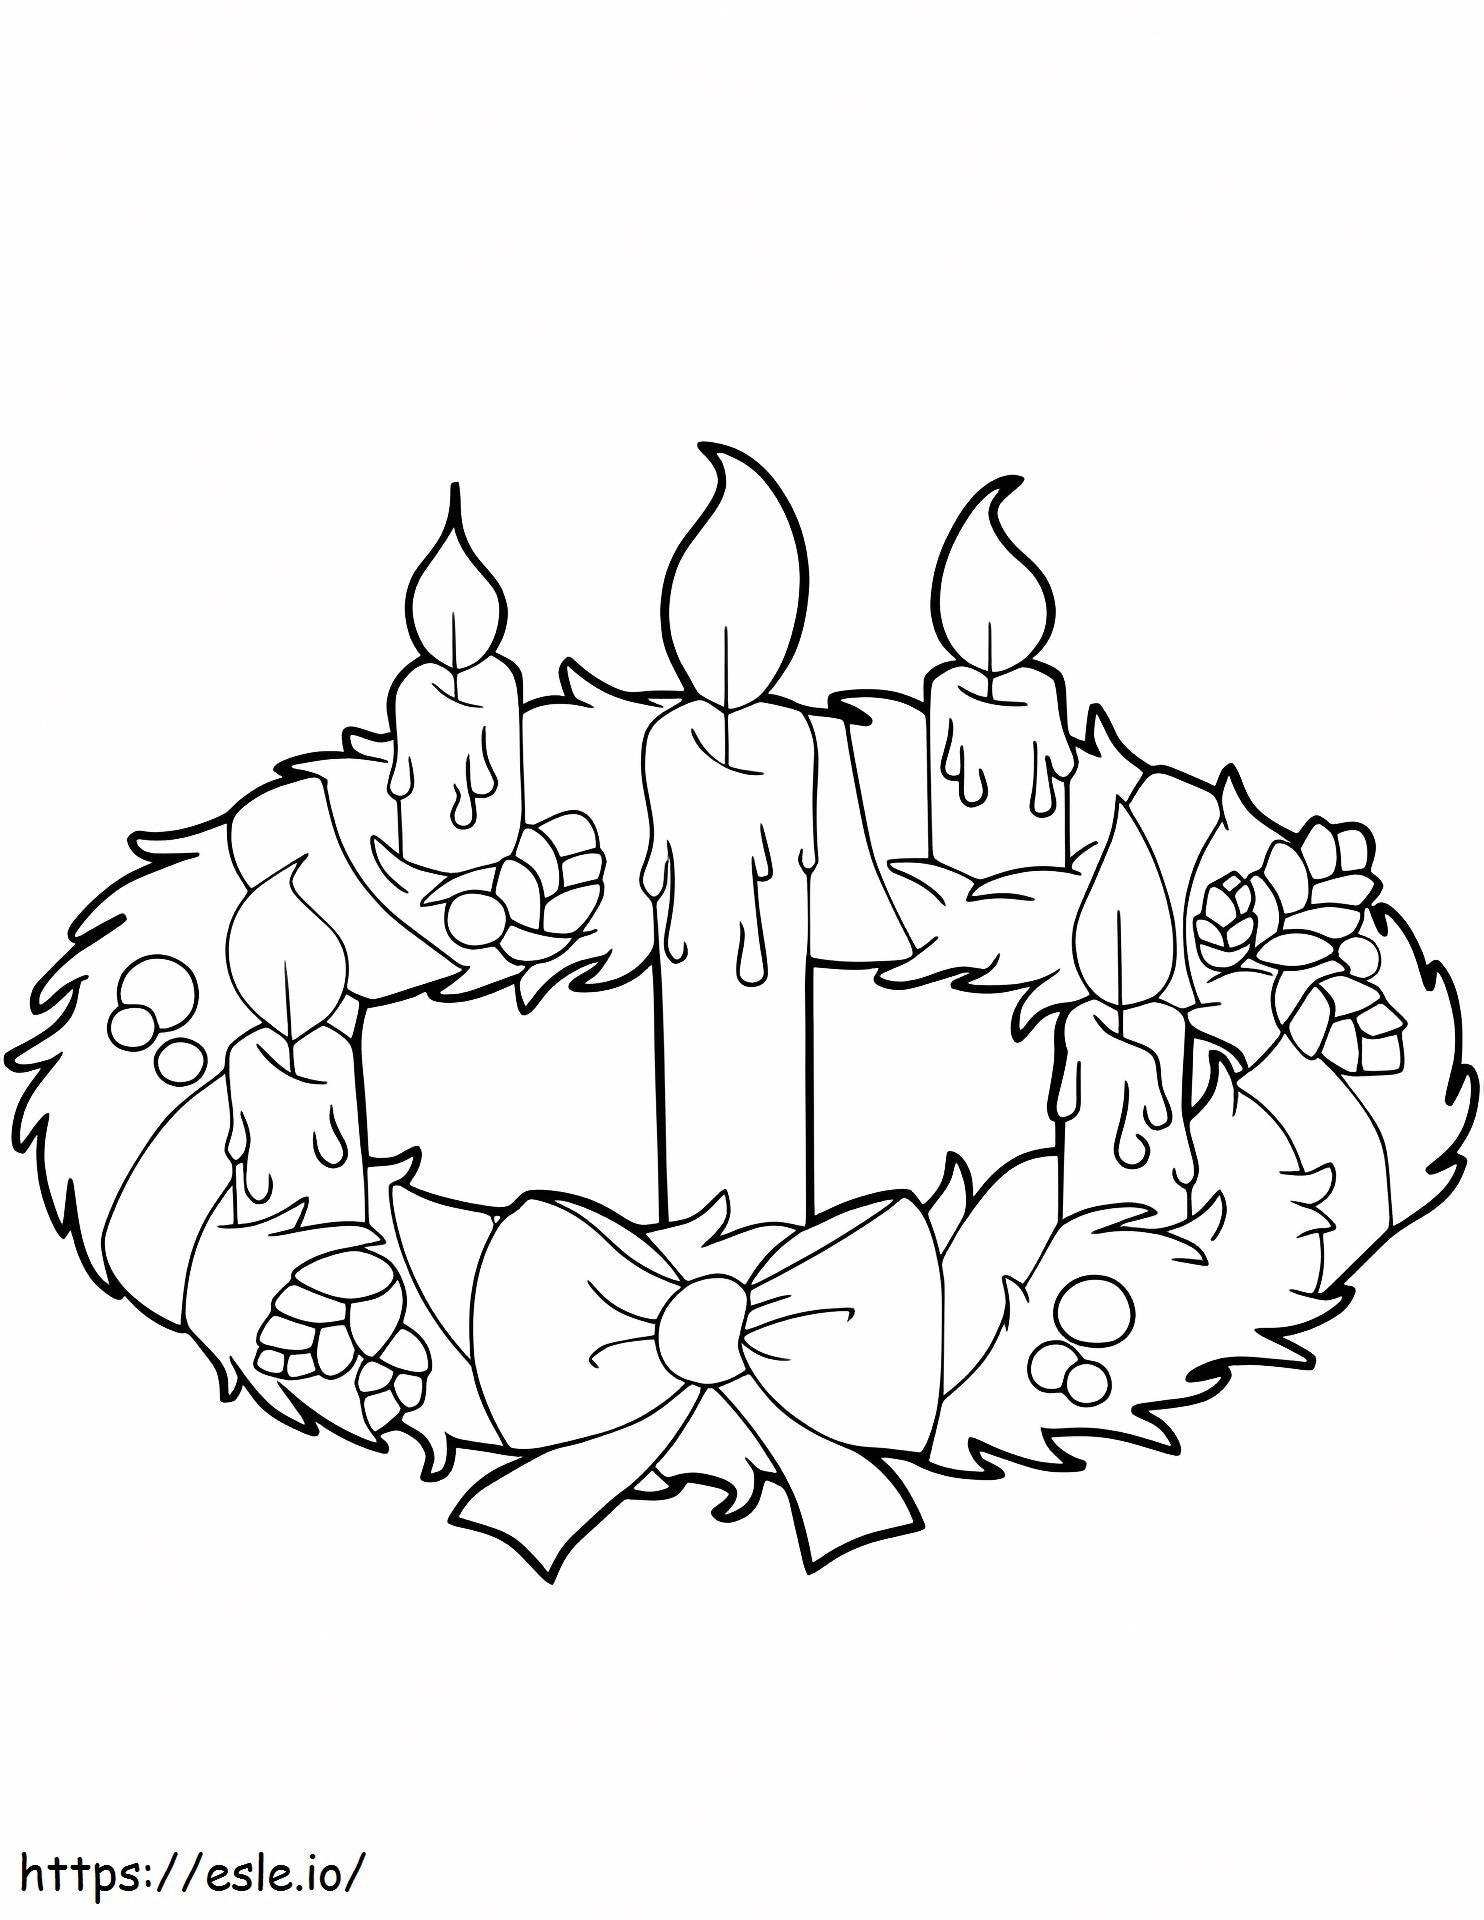 1526981573 Advent Wreath And Candles coloring page